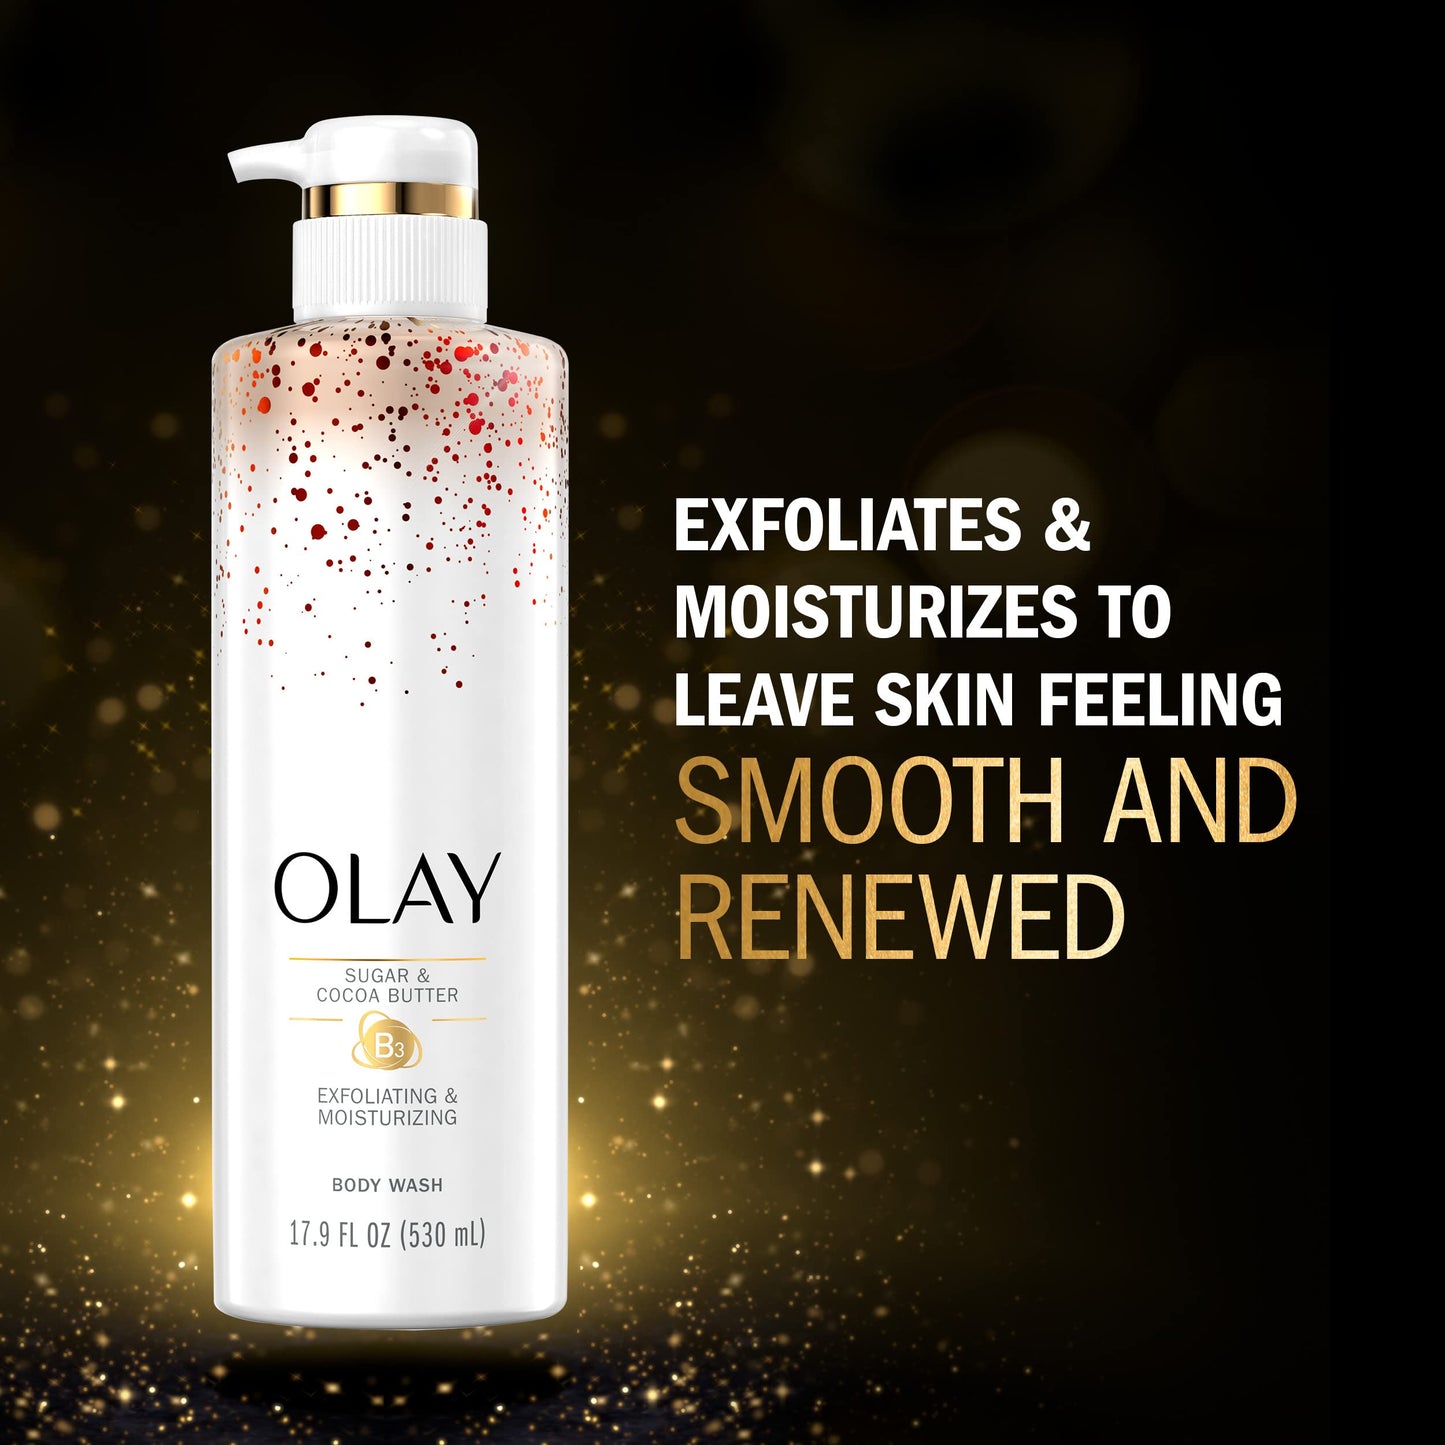 Olay Exfoliating & Moisturizing Body Wash With Sugar Cocoa Butter and Vitamin B3 20 Fl Ounce (Pack of 4)